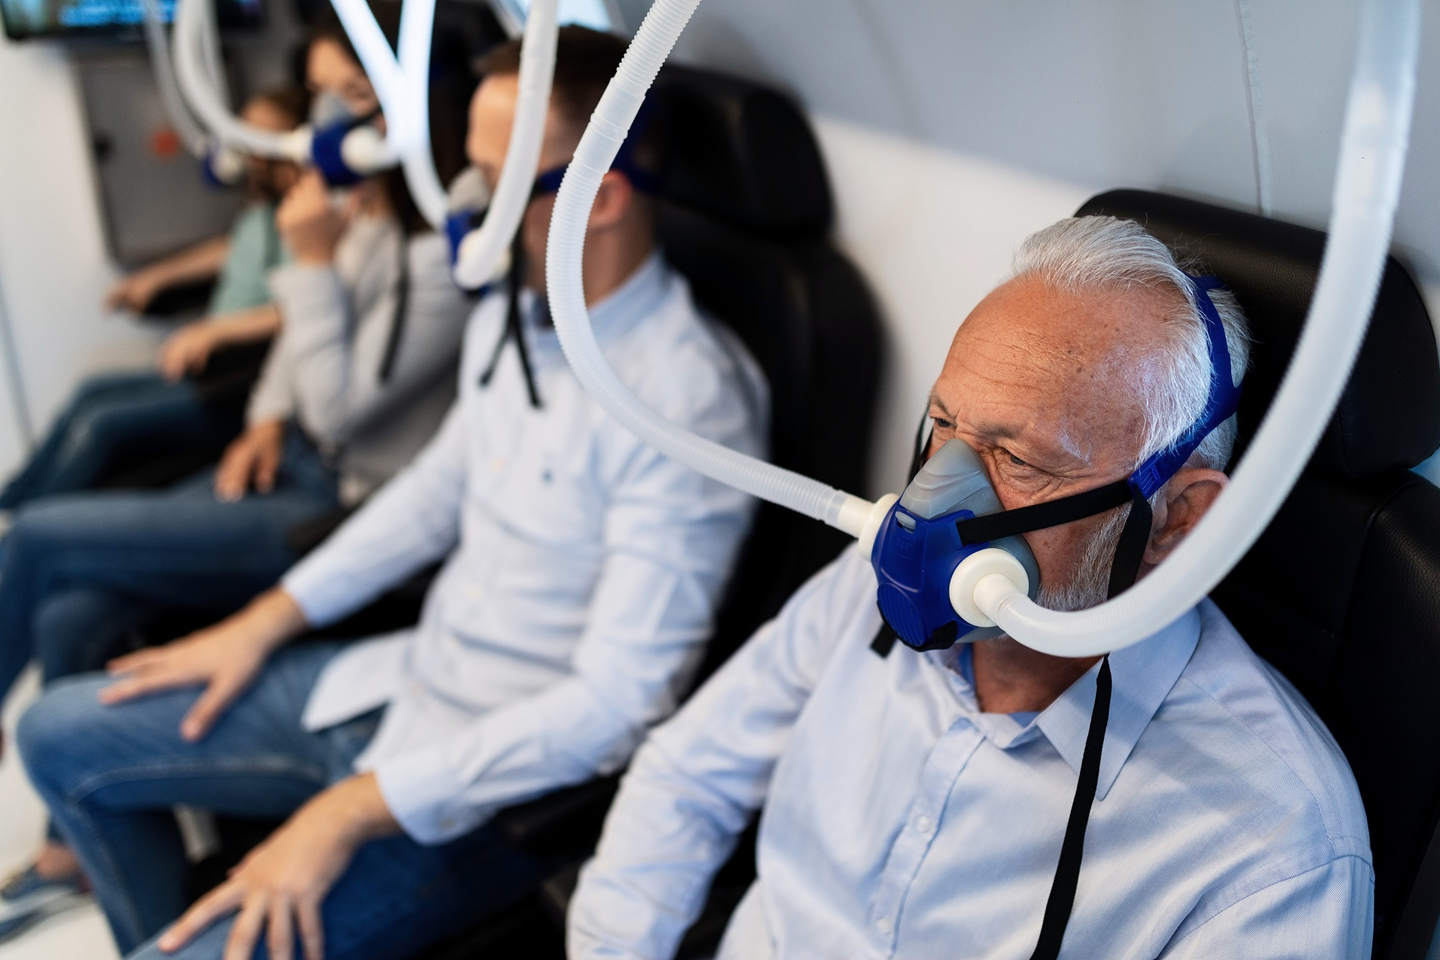 Patients take part in a hyperbaric oxygen therapy trial in Israel.